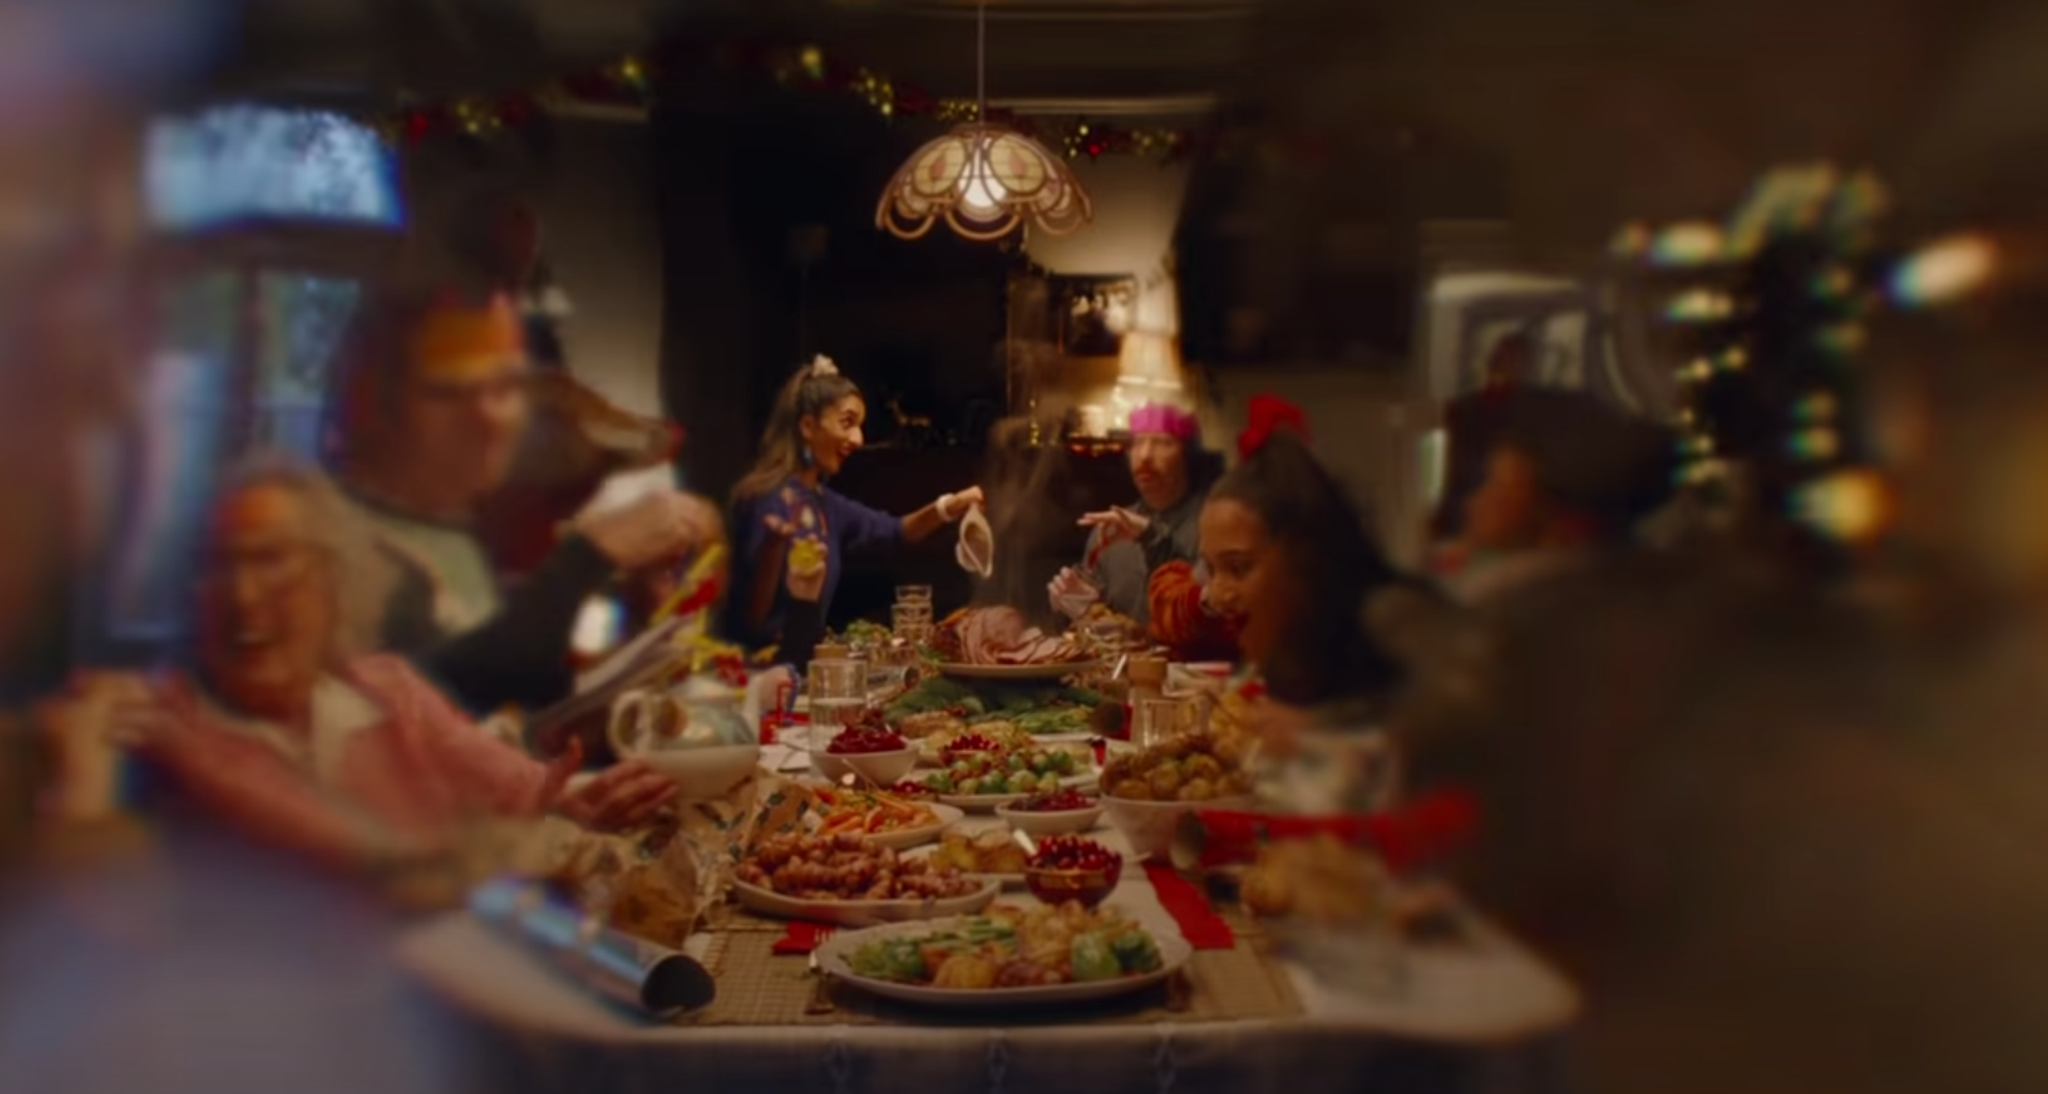 The hidden messages in 2021 Christmas ads